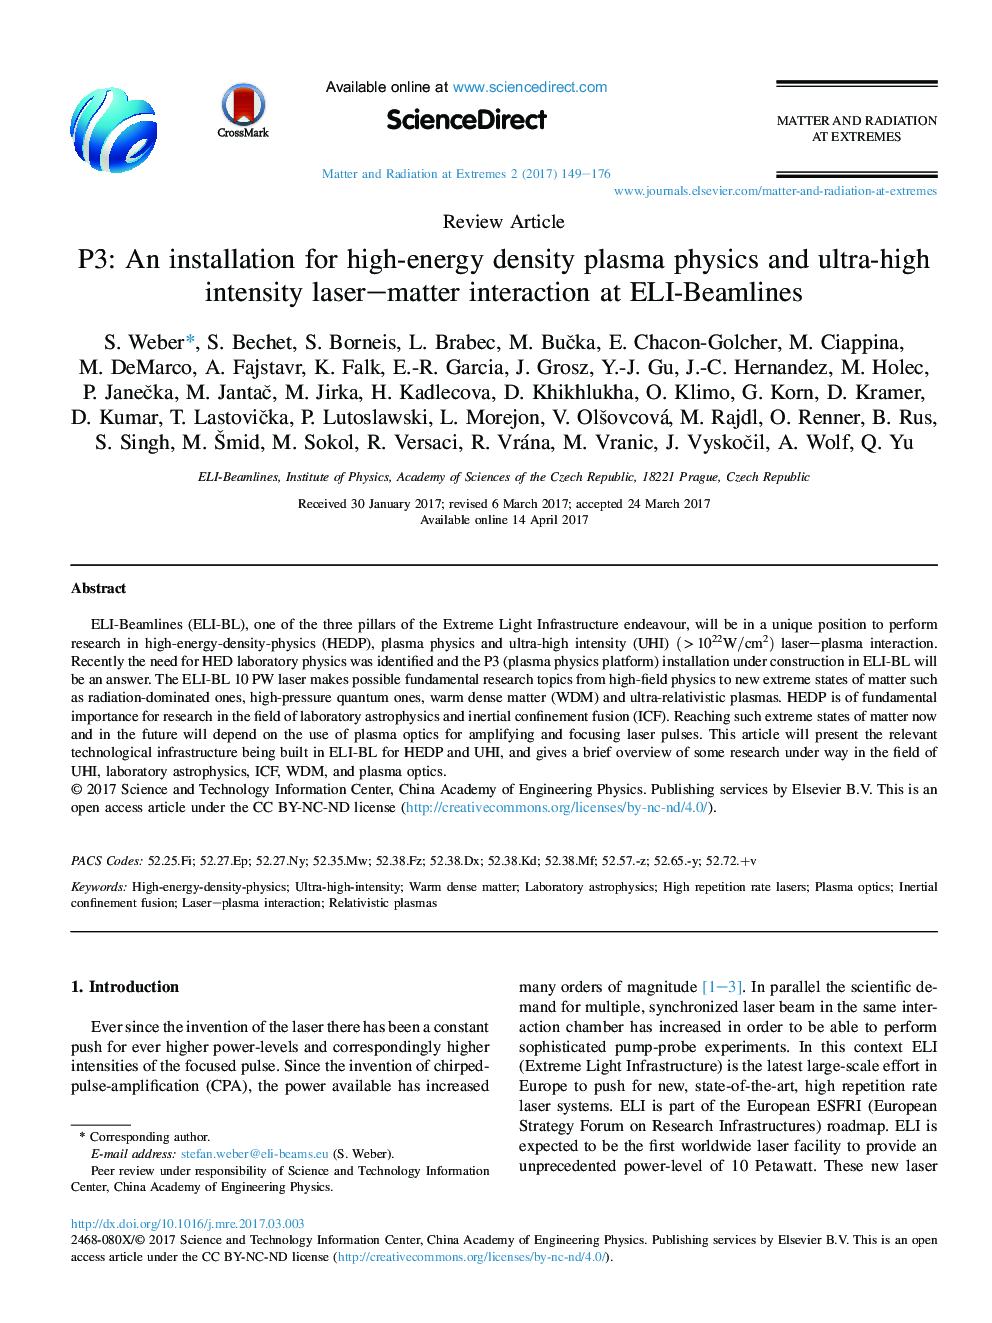 Review ArticleP3: An installation for high-energy density plasma physics and ultra-high intensity laser-matter interaction at ELI-Beamlines